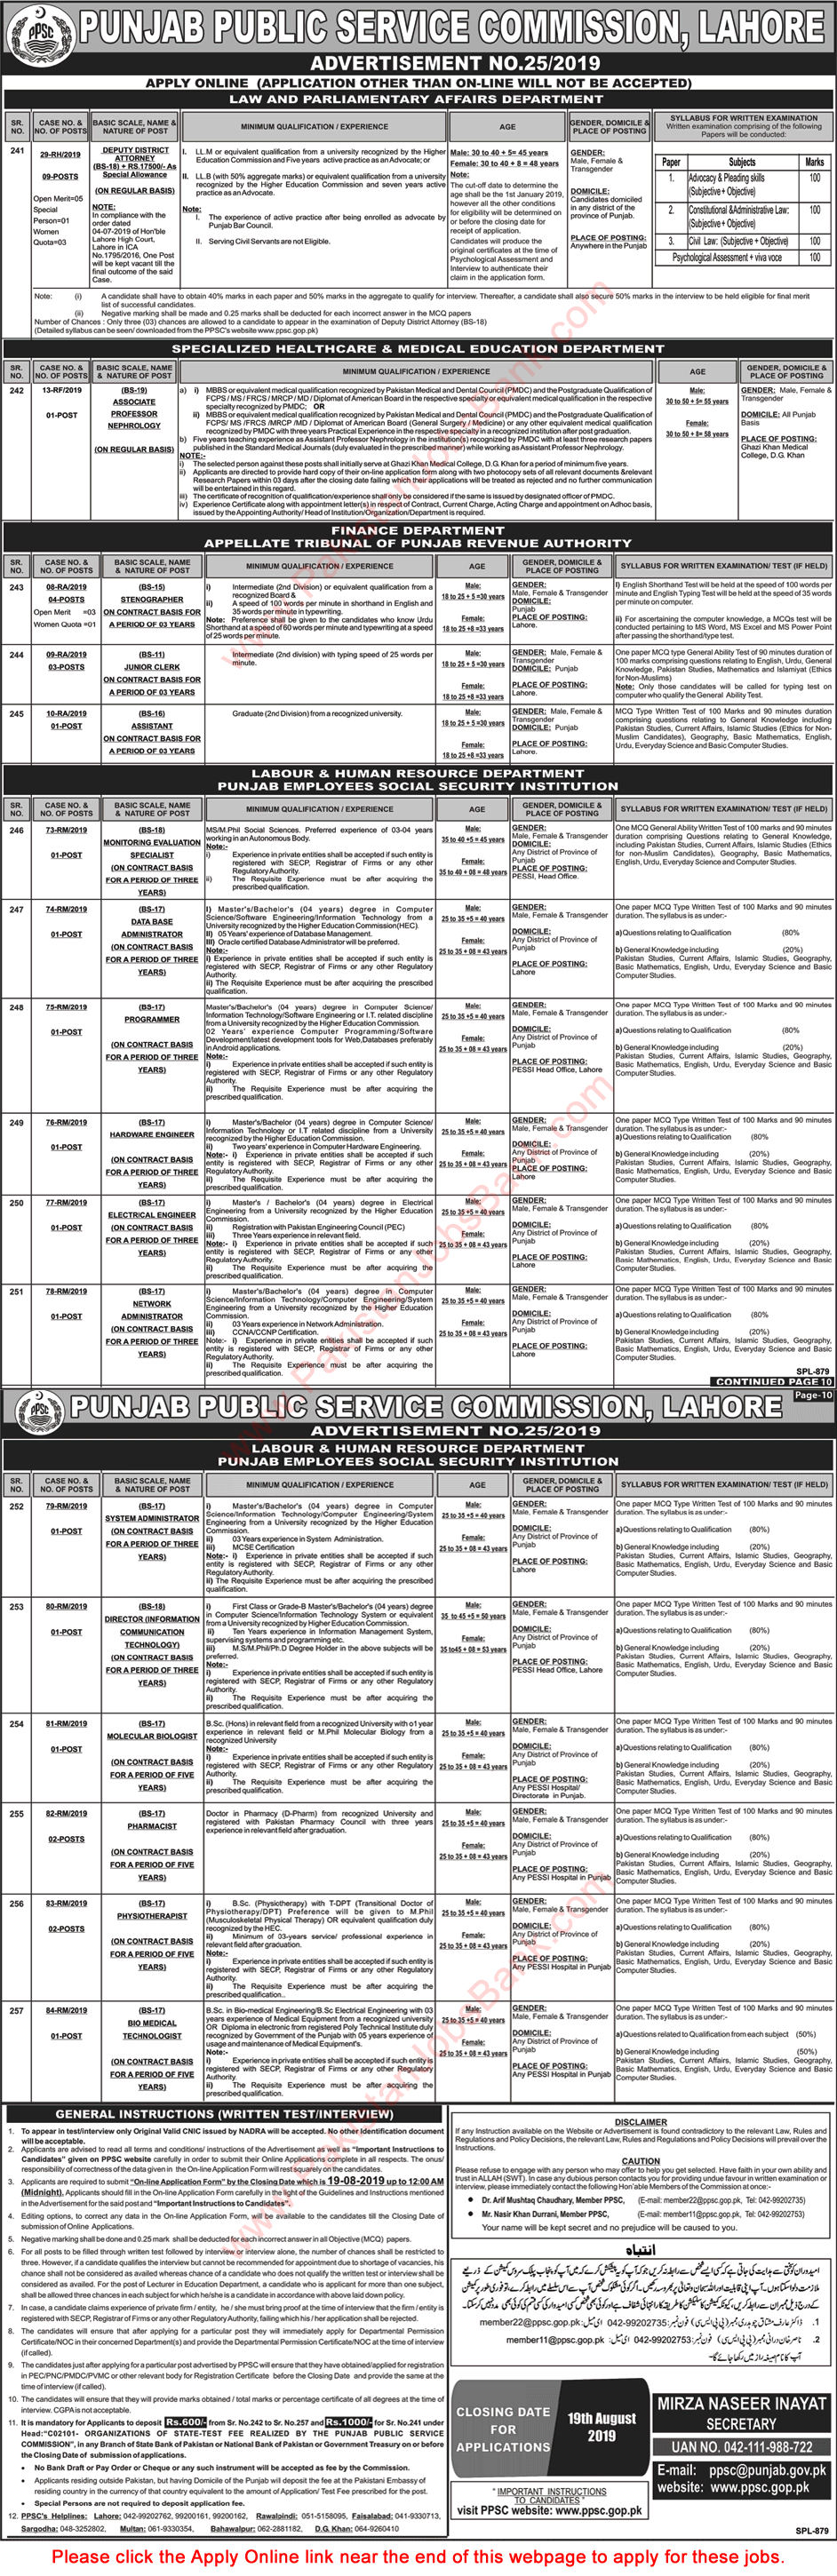 PPSC Jobs July 2019 August Apply Online Consolidated Advertisement No 25/2019 Latest